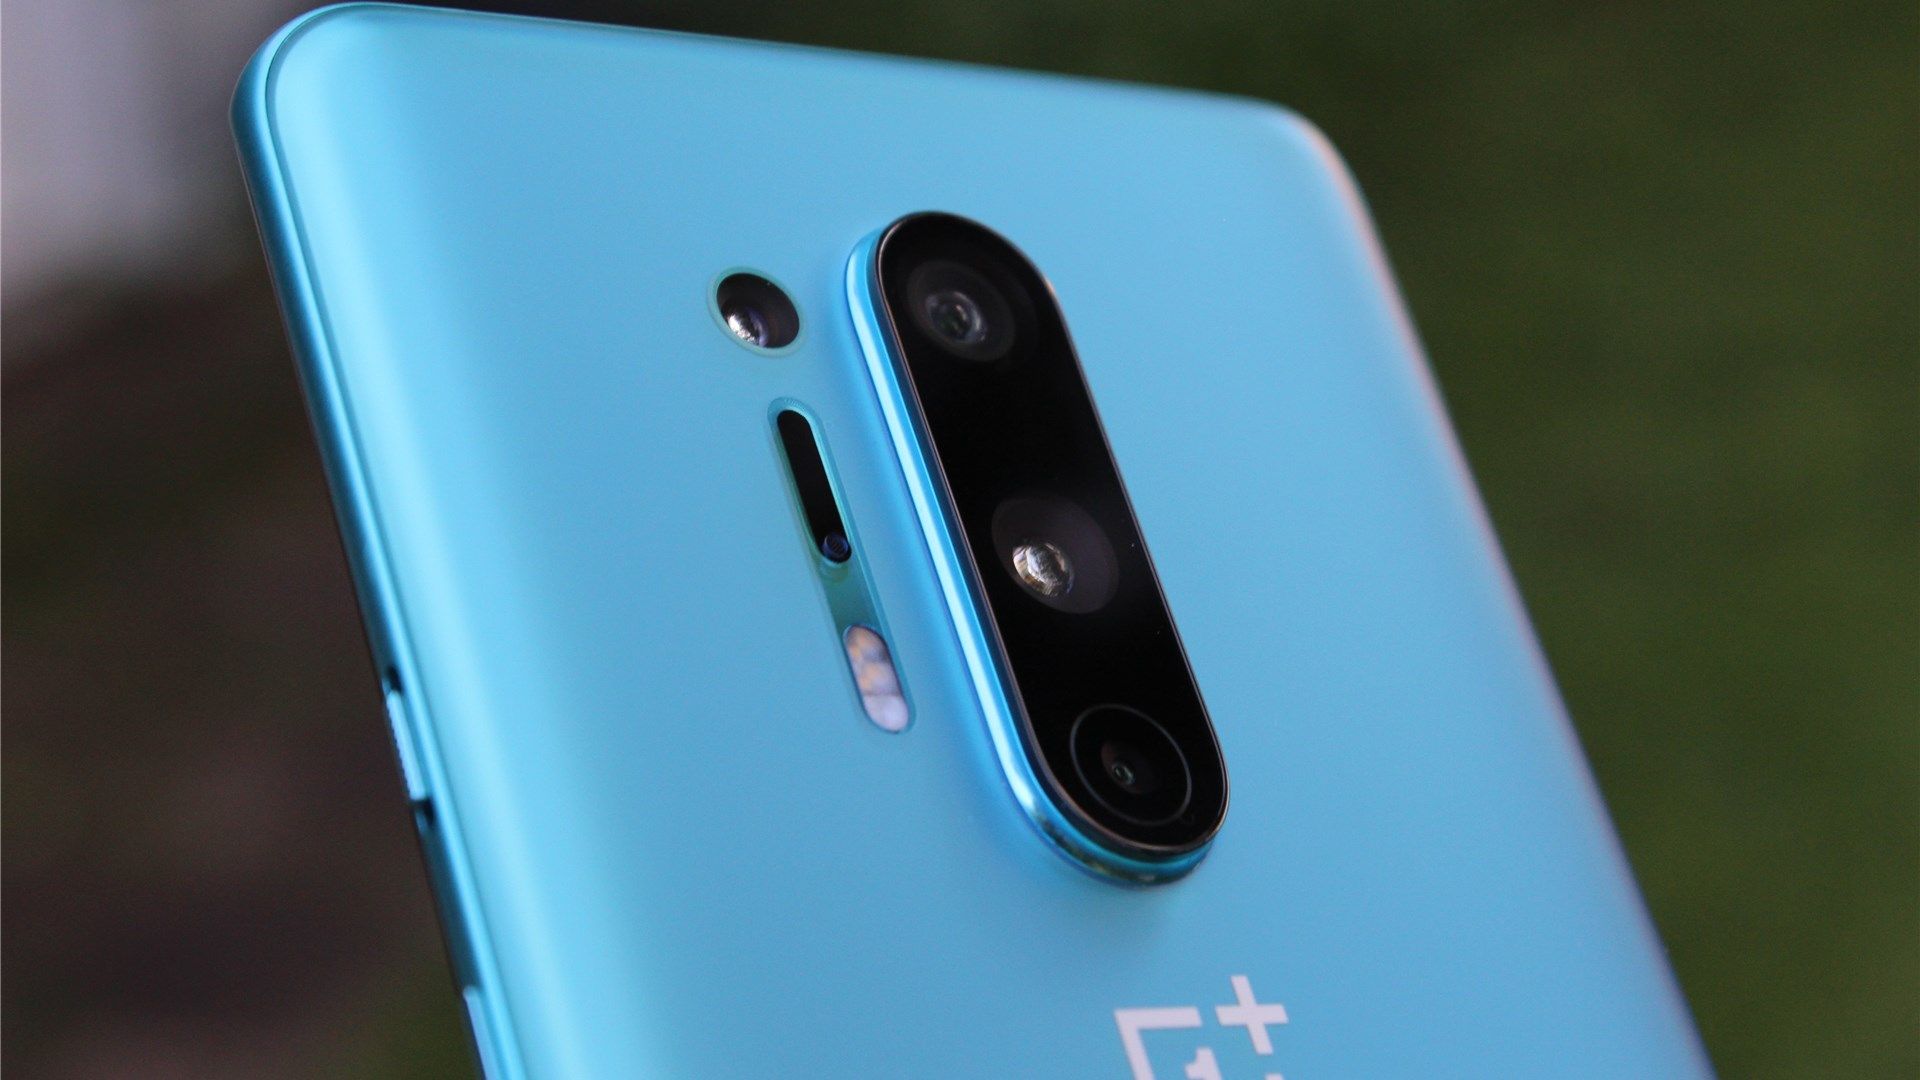 The camera array on the OnePlus 8 Pro